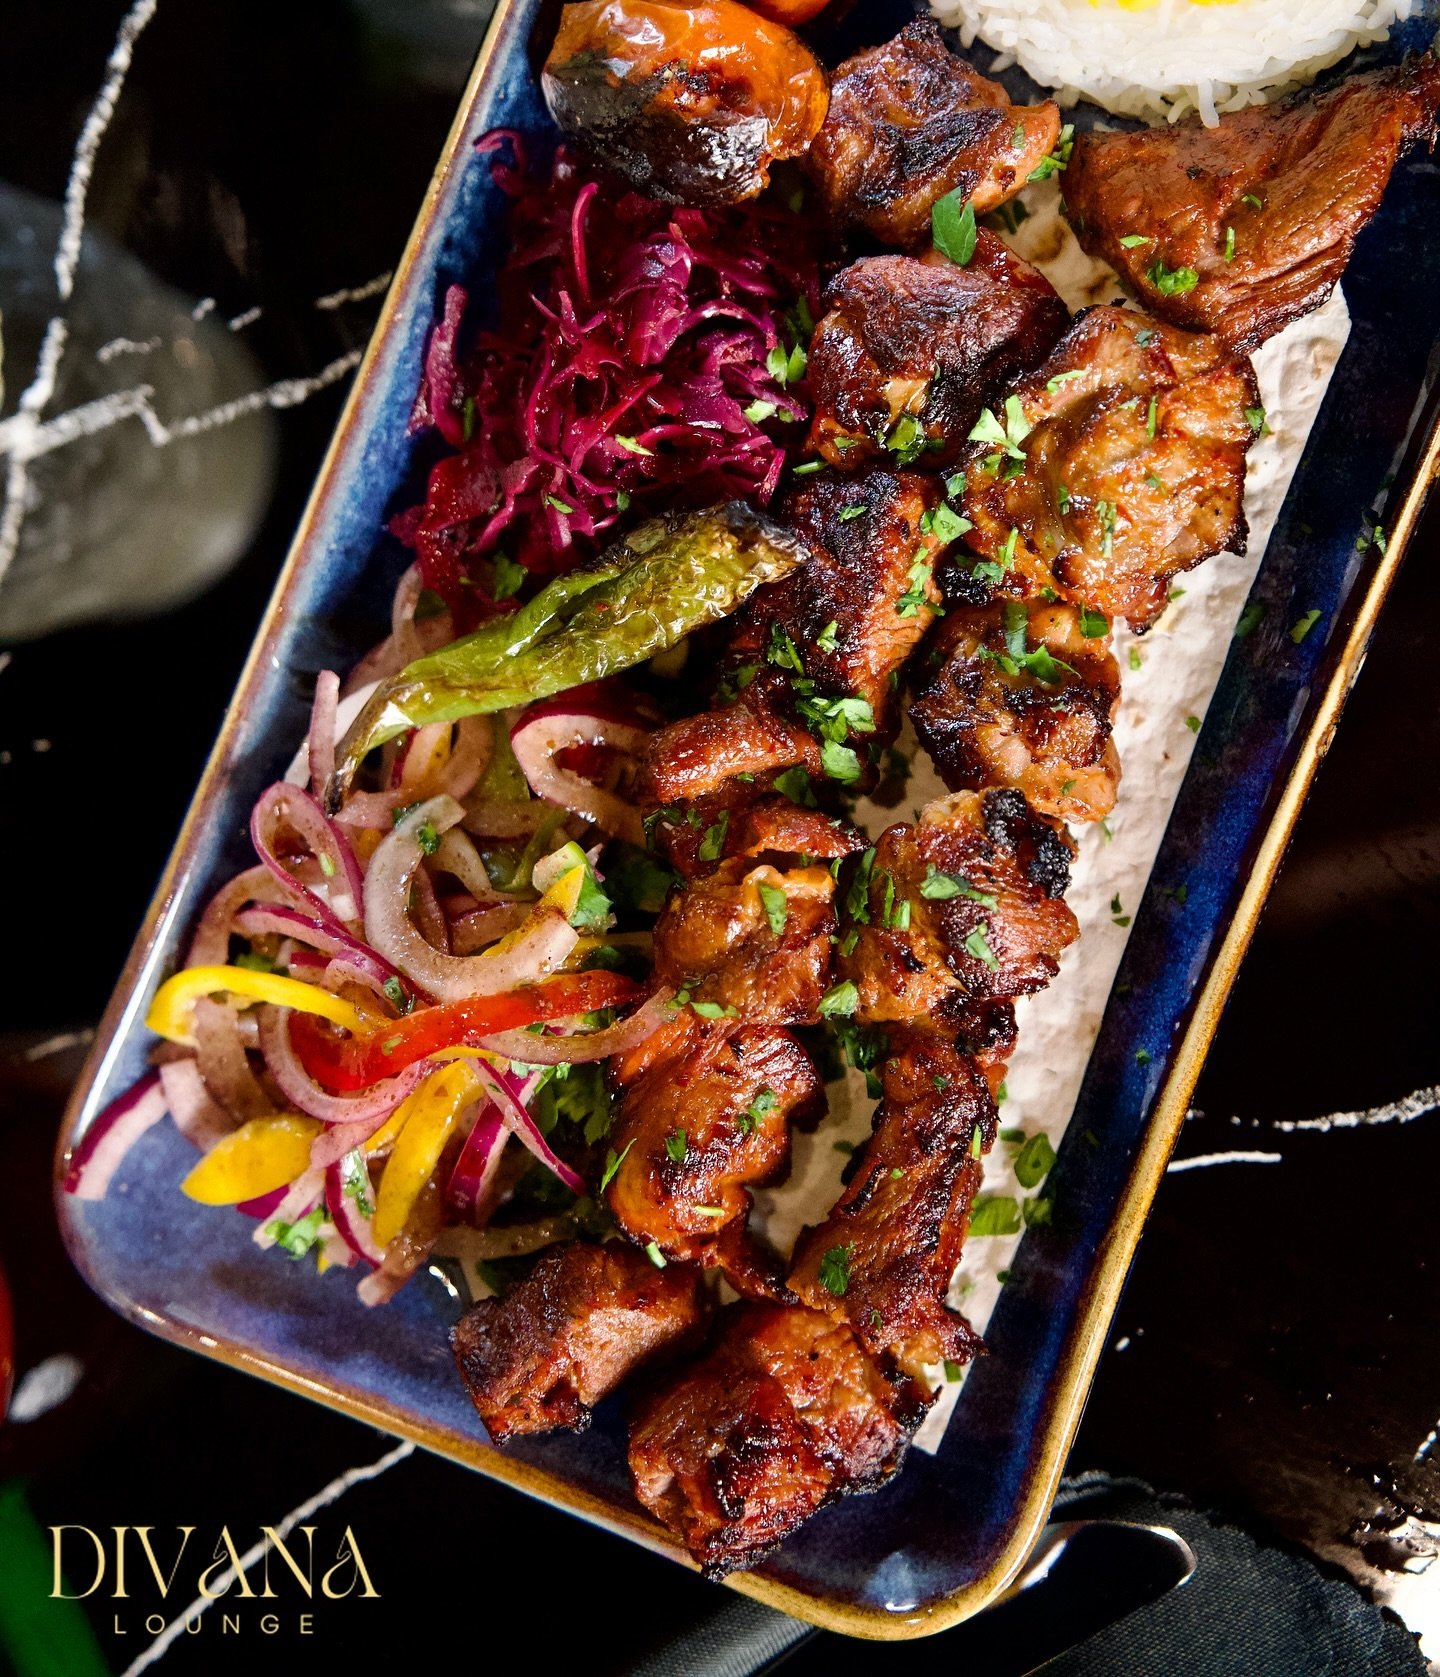 WE ARE NOW OPEN!! Have you tried our delicious grilled dishes? 😋🤤

Bringing a taste of the Mediterranean to Sutton! 👀

Walk-ins available | Call: 07355049930 

OUR WEBSITE IS LIVE: WWW.DIVANALOUNGE.CO.UK 💻

Opening Times ⏰:

SUN - THURS: 5PMPM - 